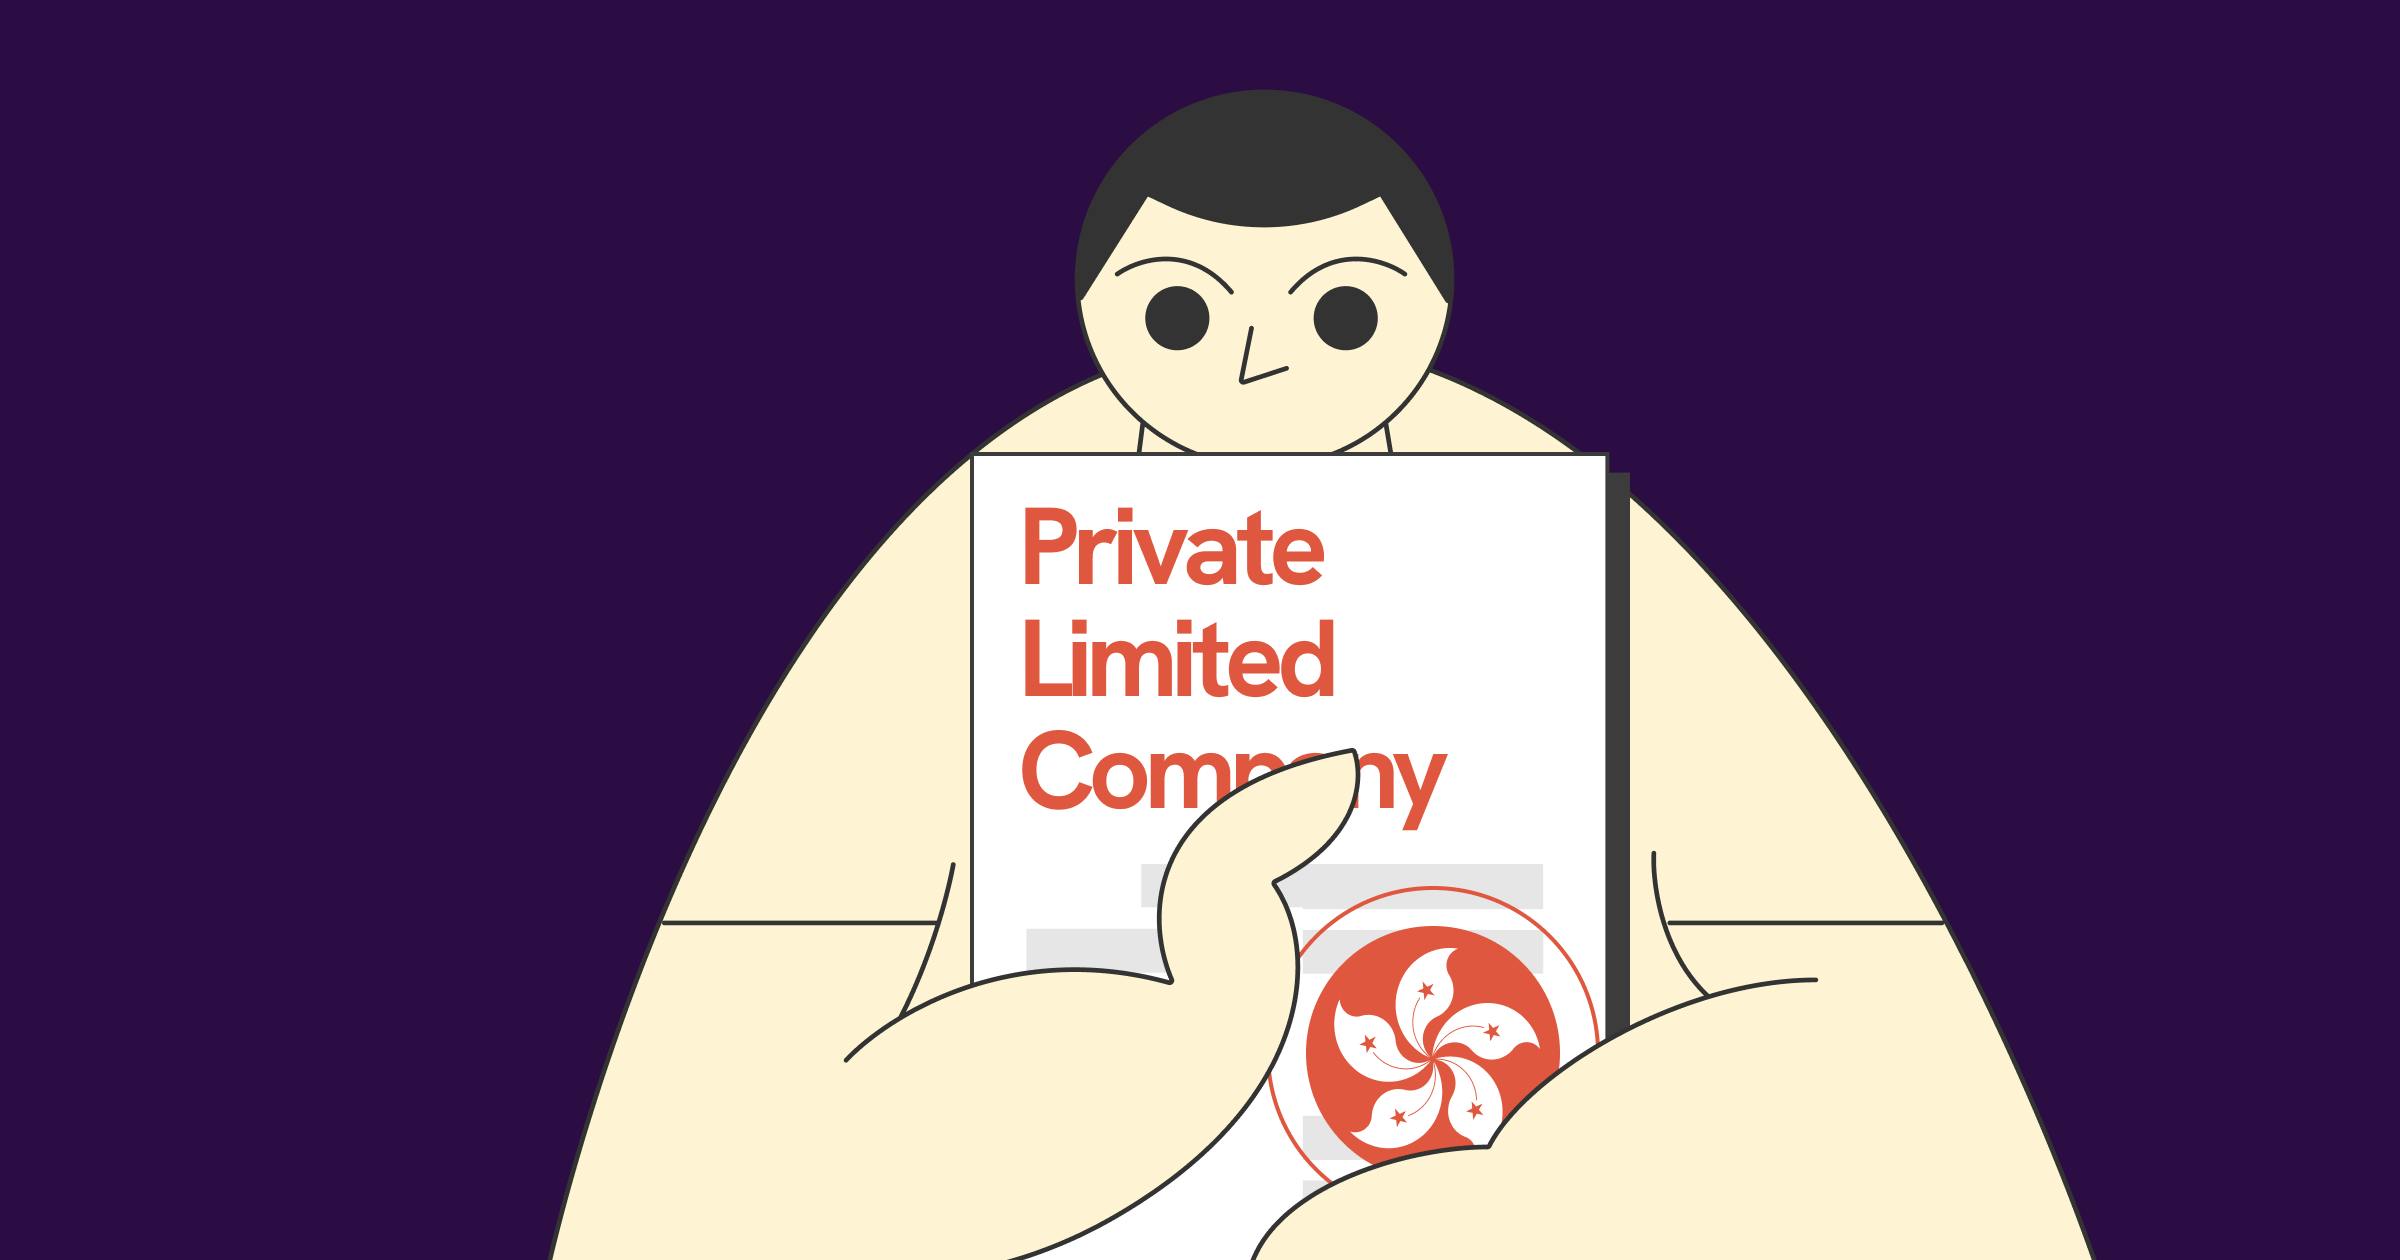 an illustration of statrys mascot holding a book that says private limited company